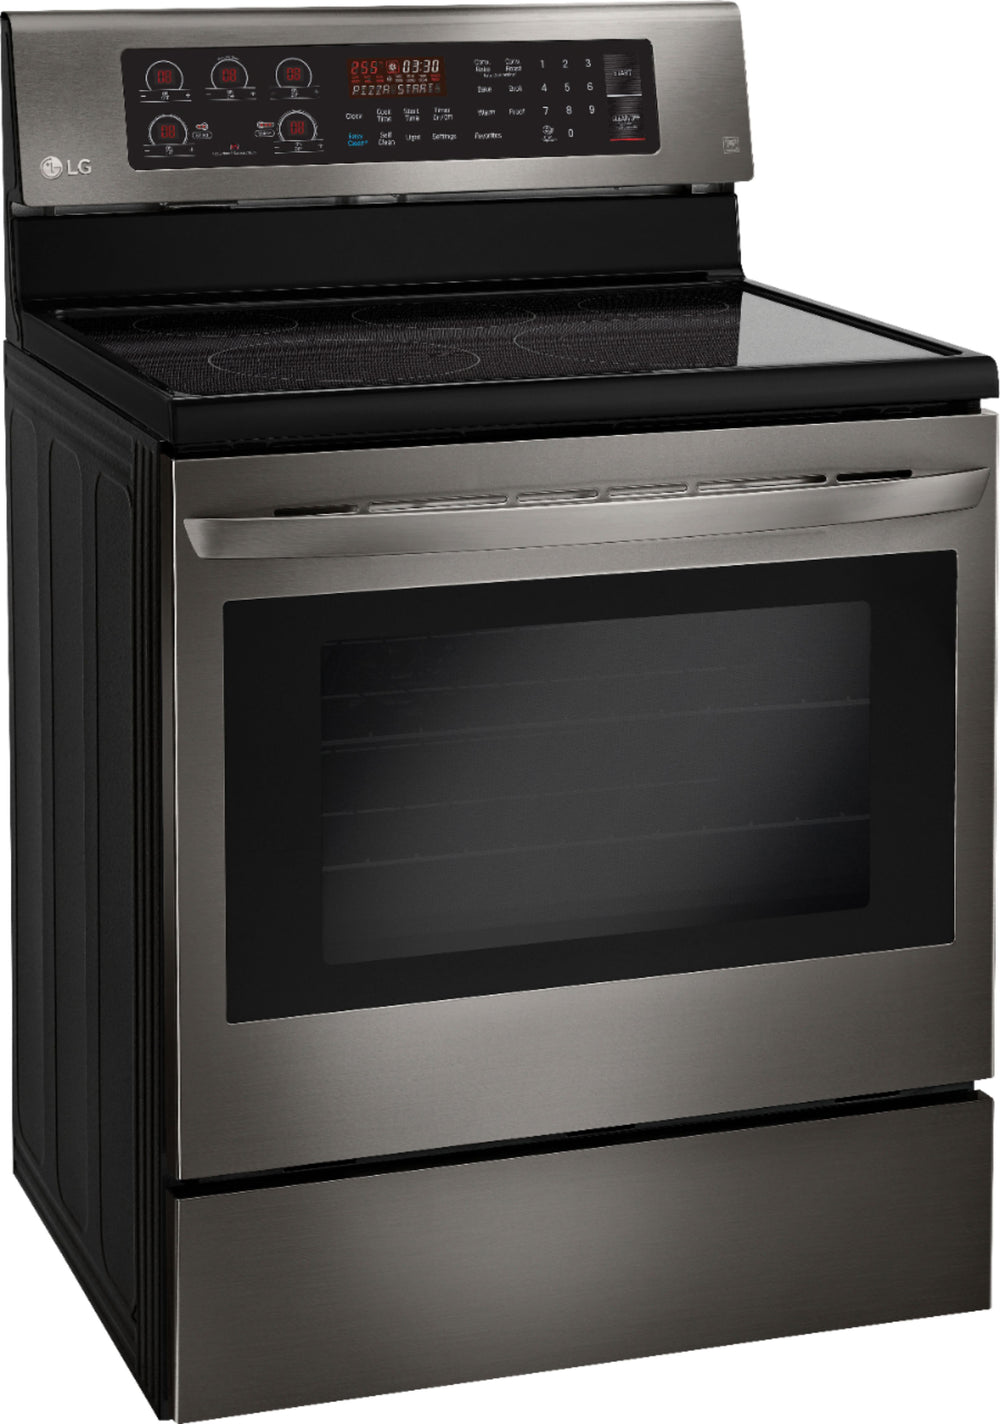 LG - 6.3 Cu. Ft. Self-Cleaning Freestanding Electric Convection Range with EasyClean - Black Stainless Steel_1